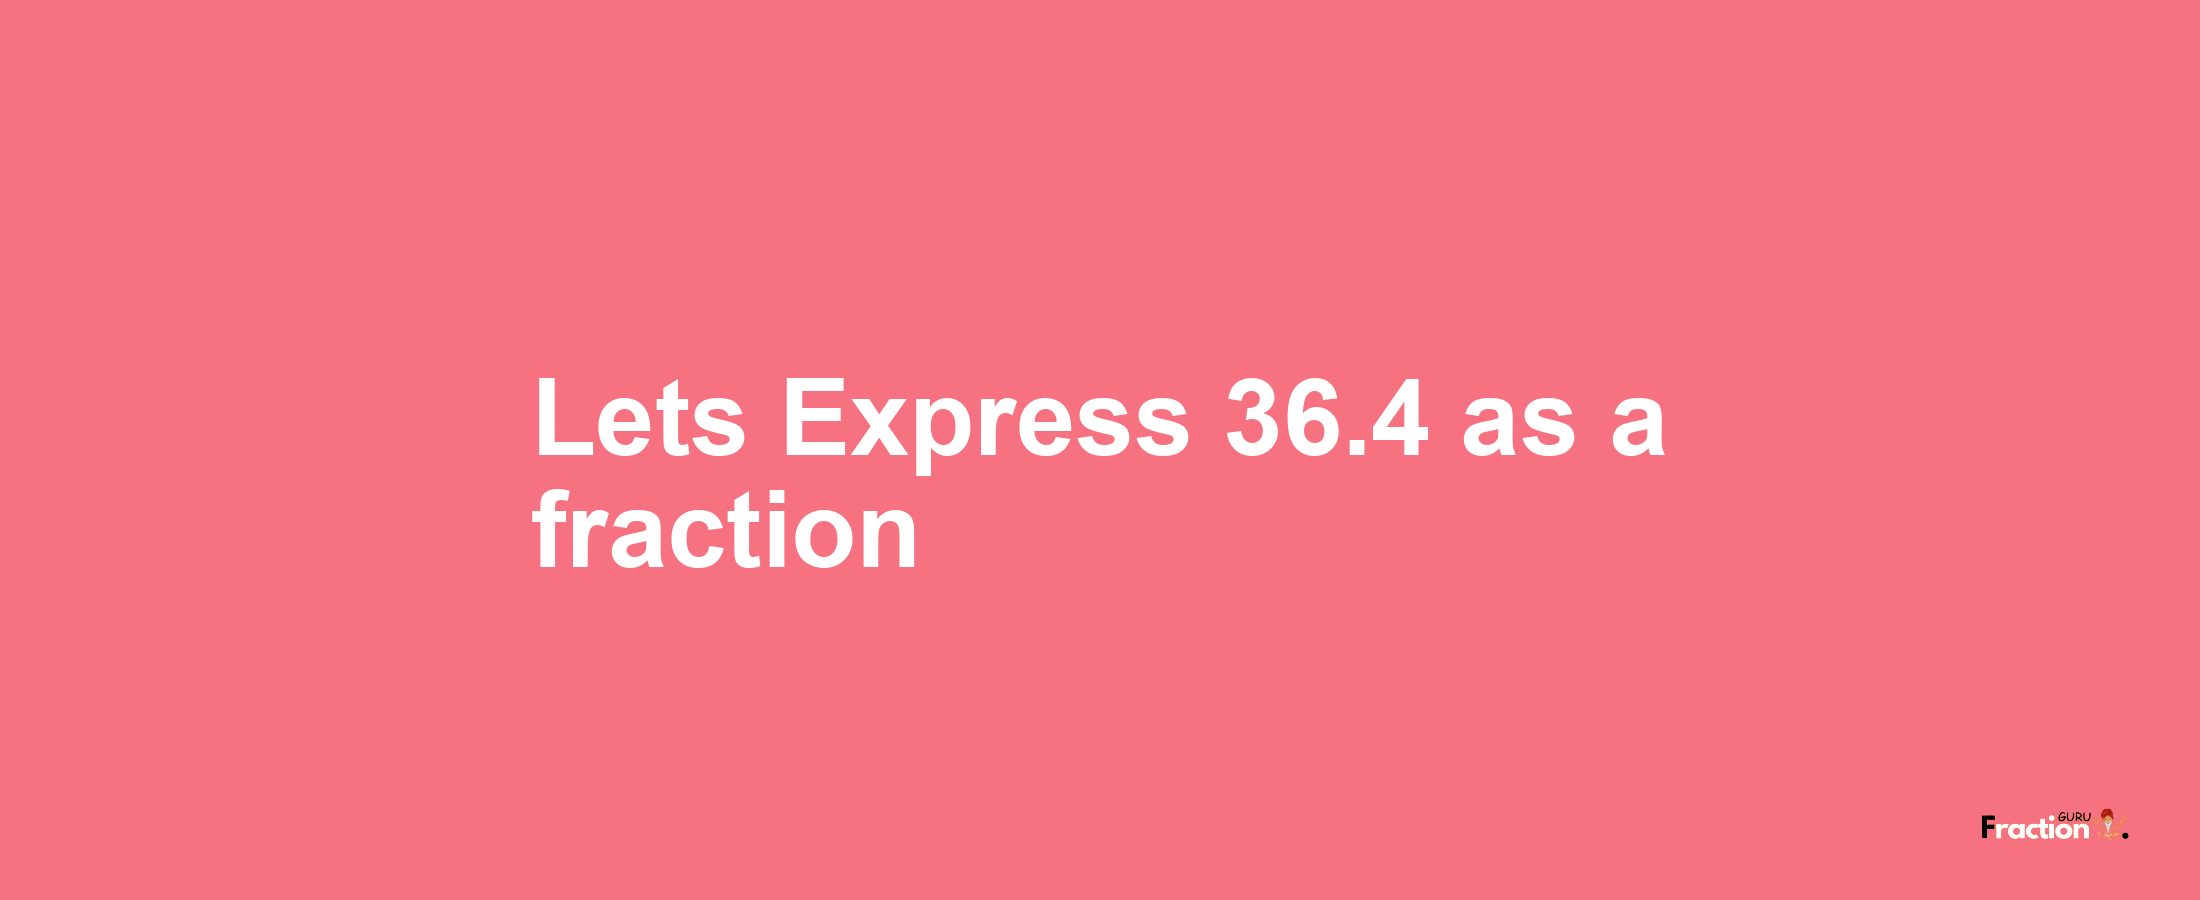 Lets Express 36.4 as afraction